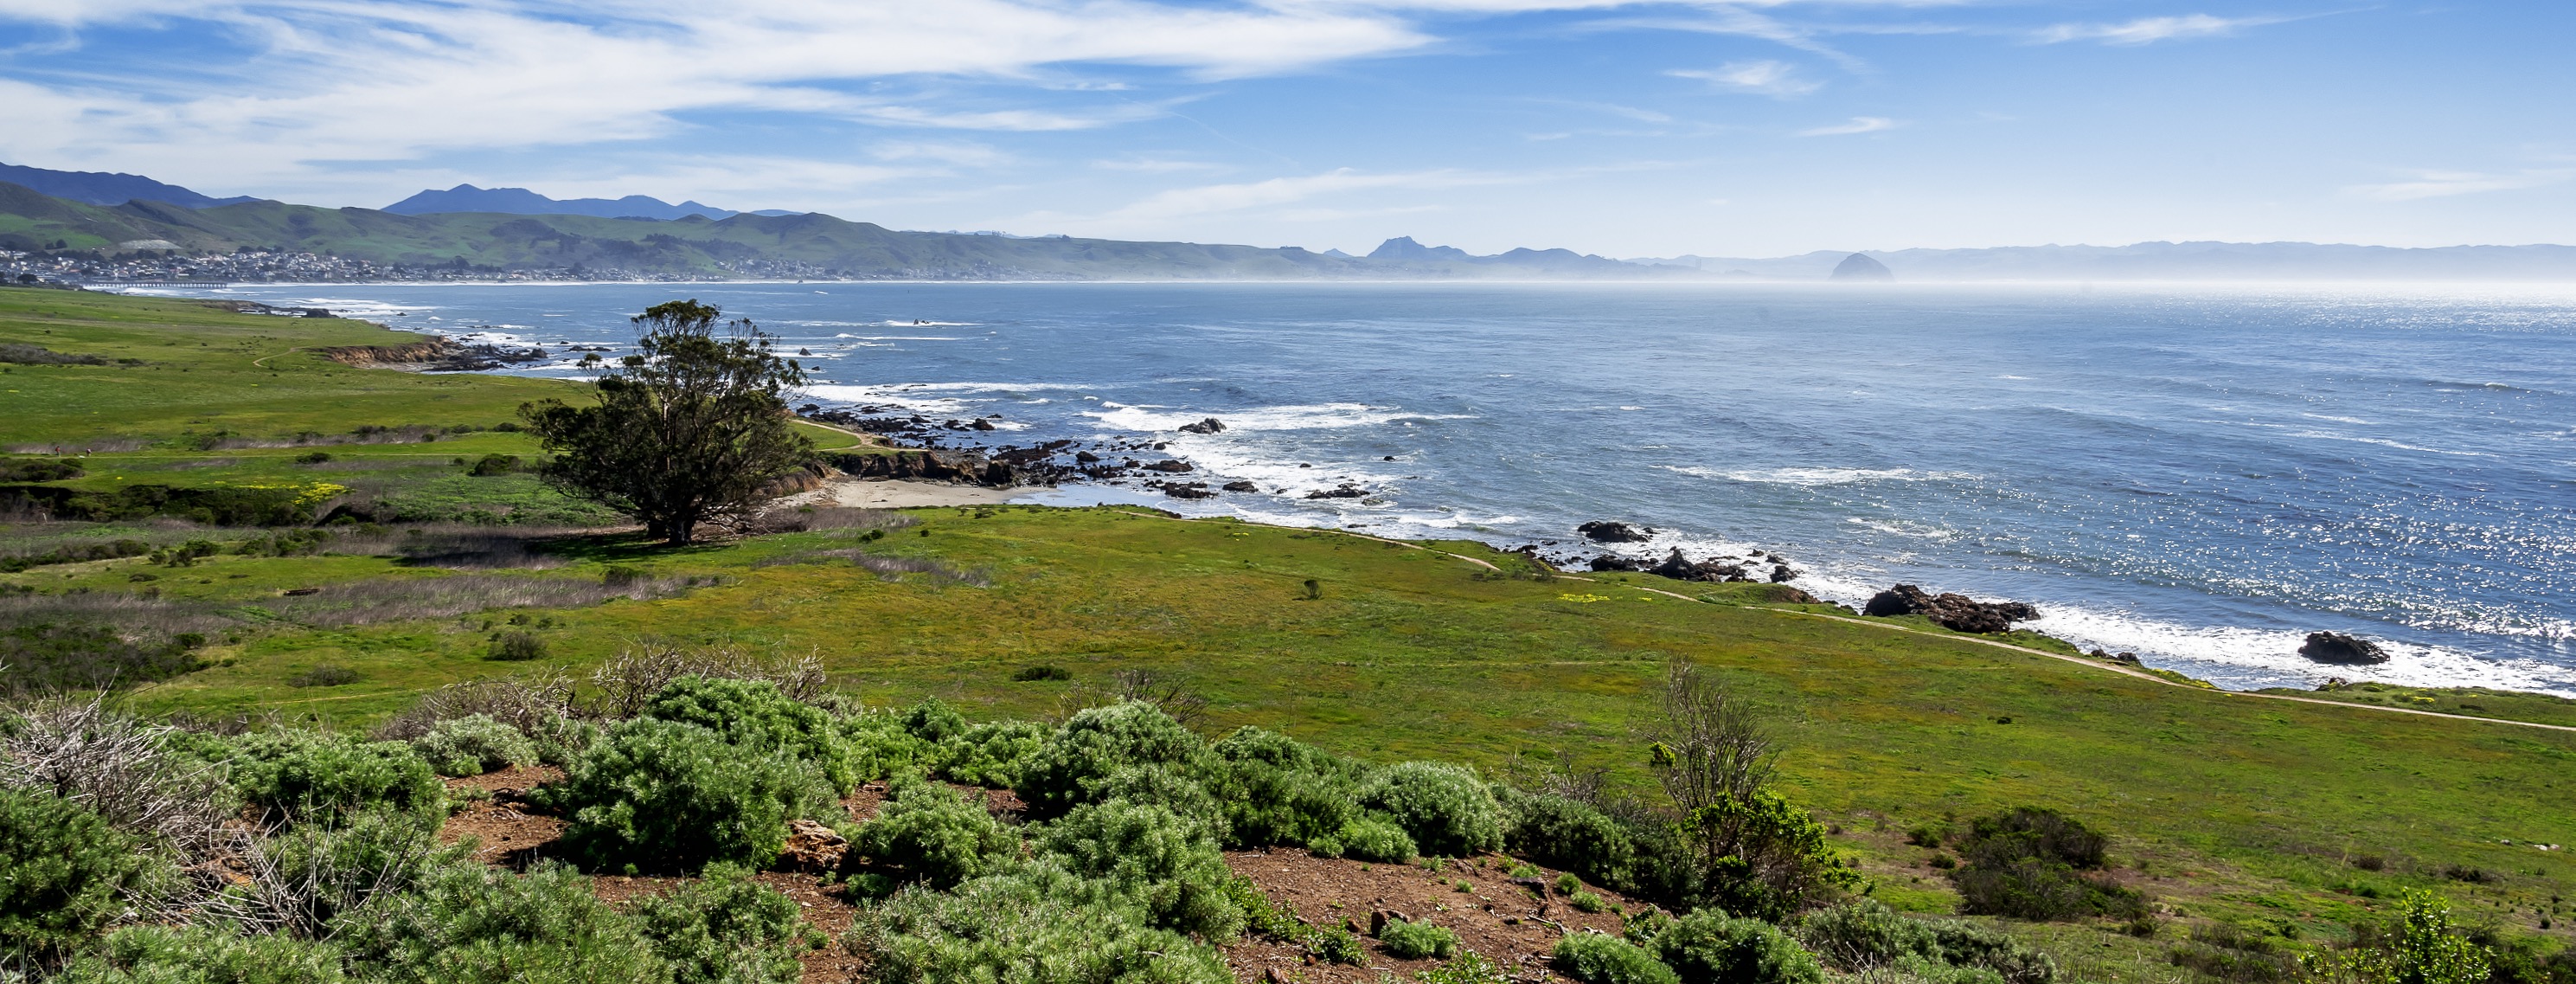 Image from a hill with coastal vegetation overlooking the rock coastline that stretches many miles. Near the edge of the shoreline, there is a coastal trail. 